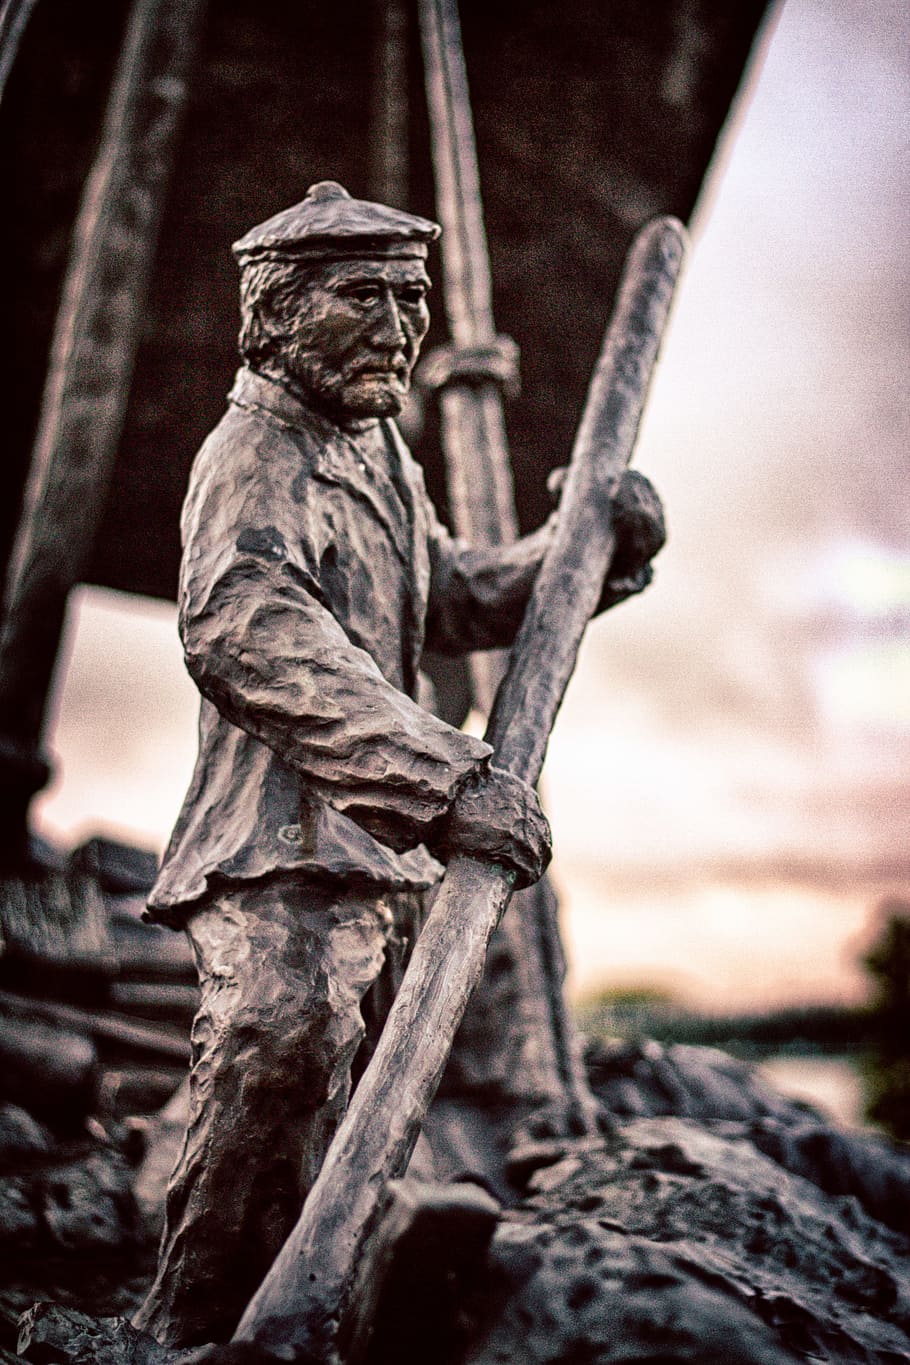 boatman, statue, selkirk, mb, human representation, sculpture, representation, male likeness, art and craft, focus on foreground